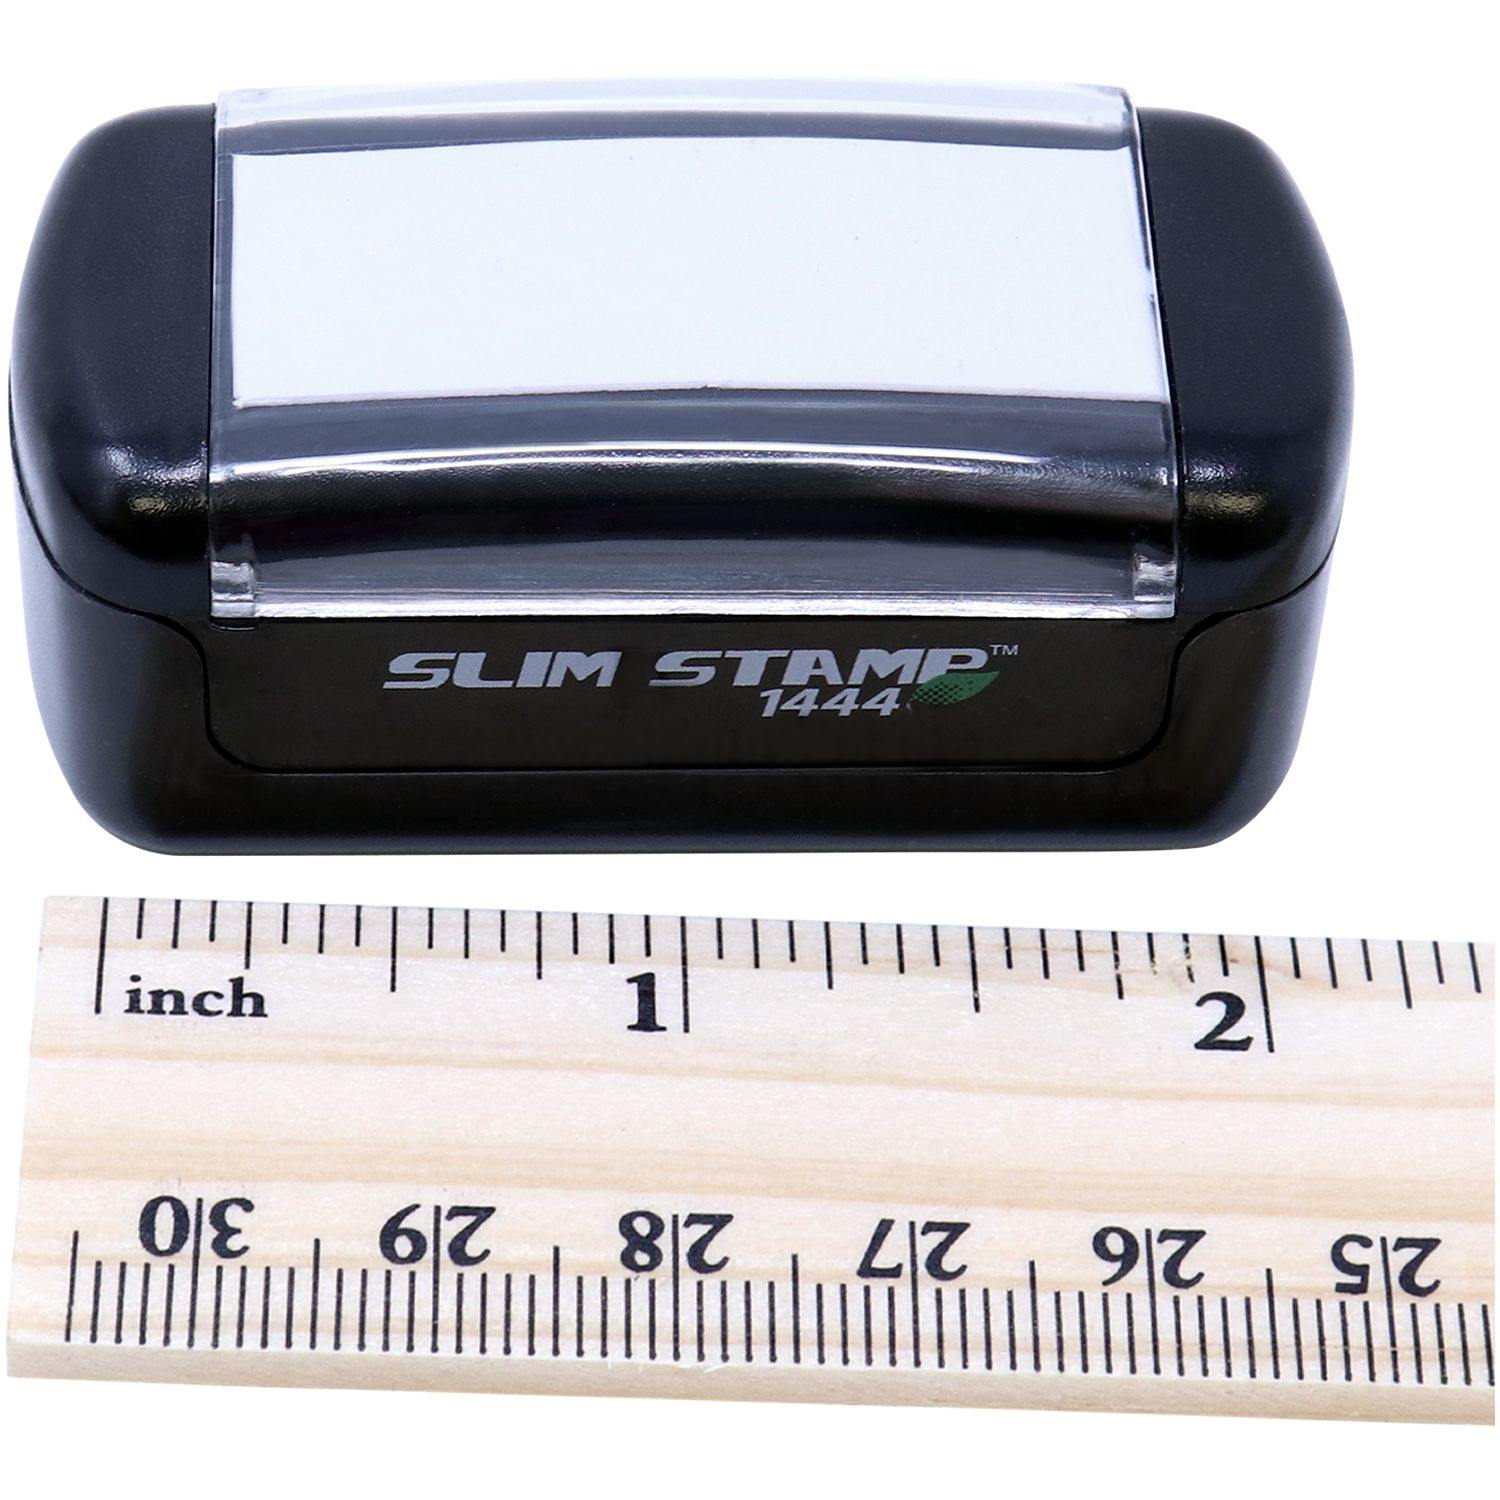 Measurement Slim Pre-Inked Official Stamp with Ruler